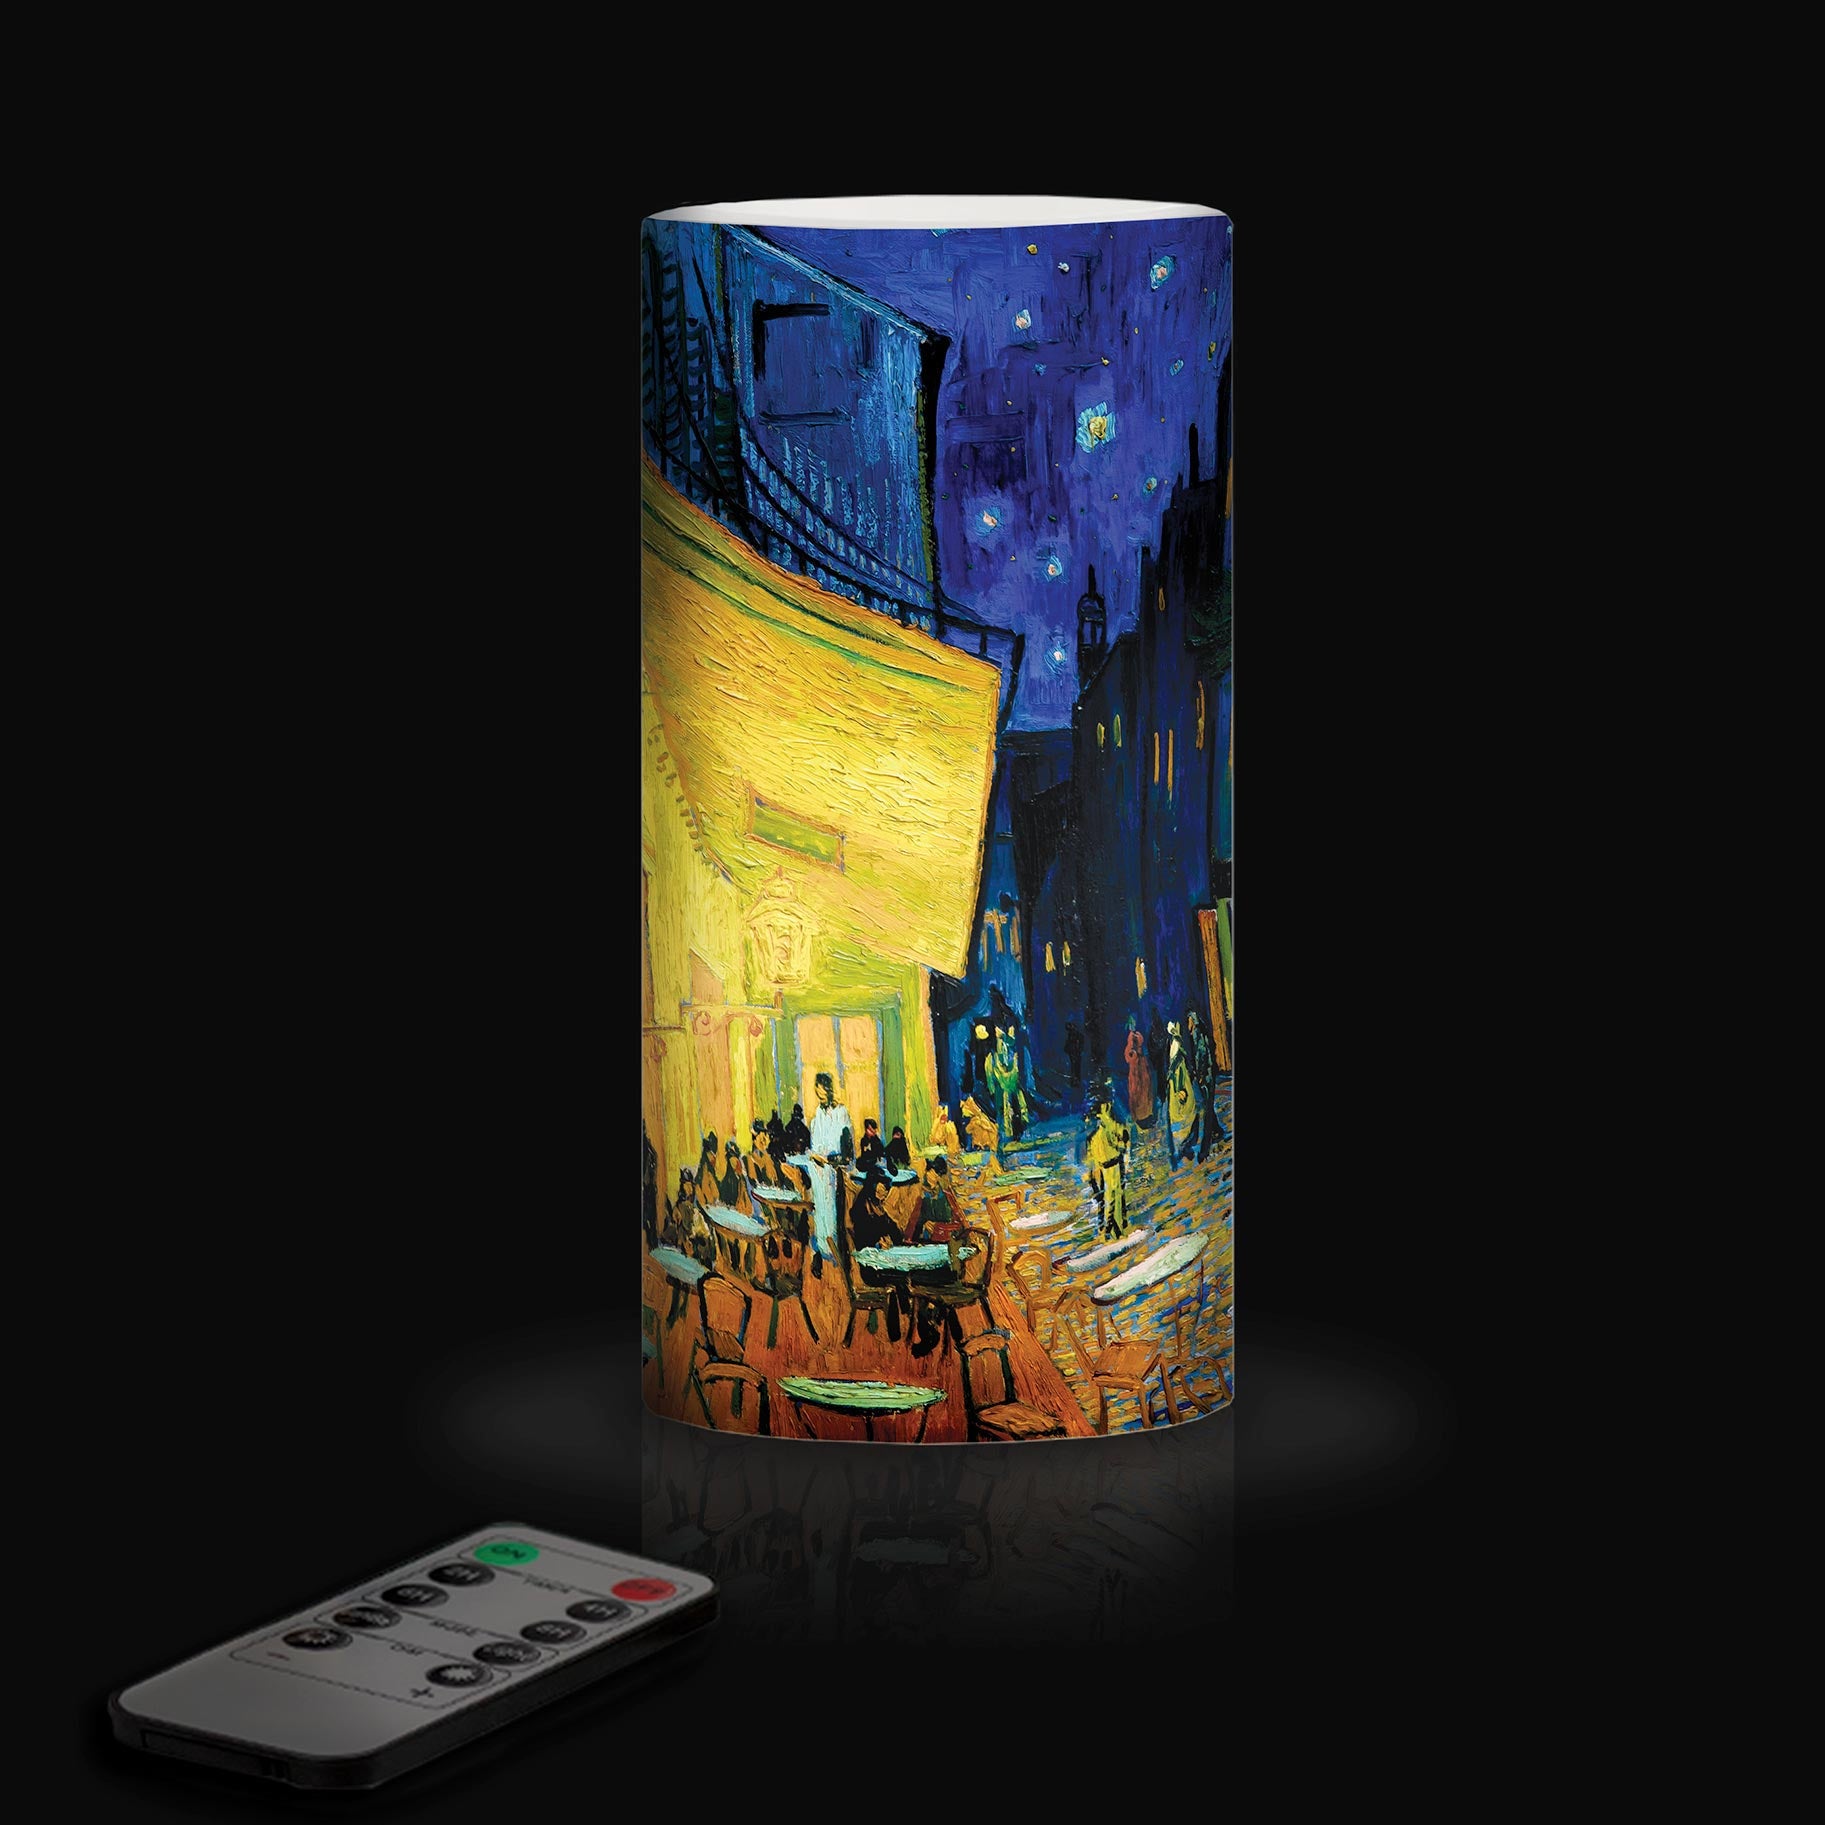 van Gogh Café Terrace at Night 6" LED Real Wax Candle with Remote